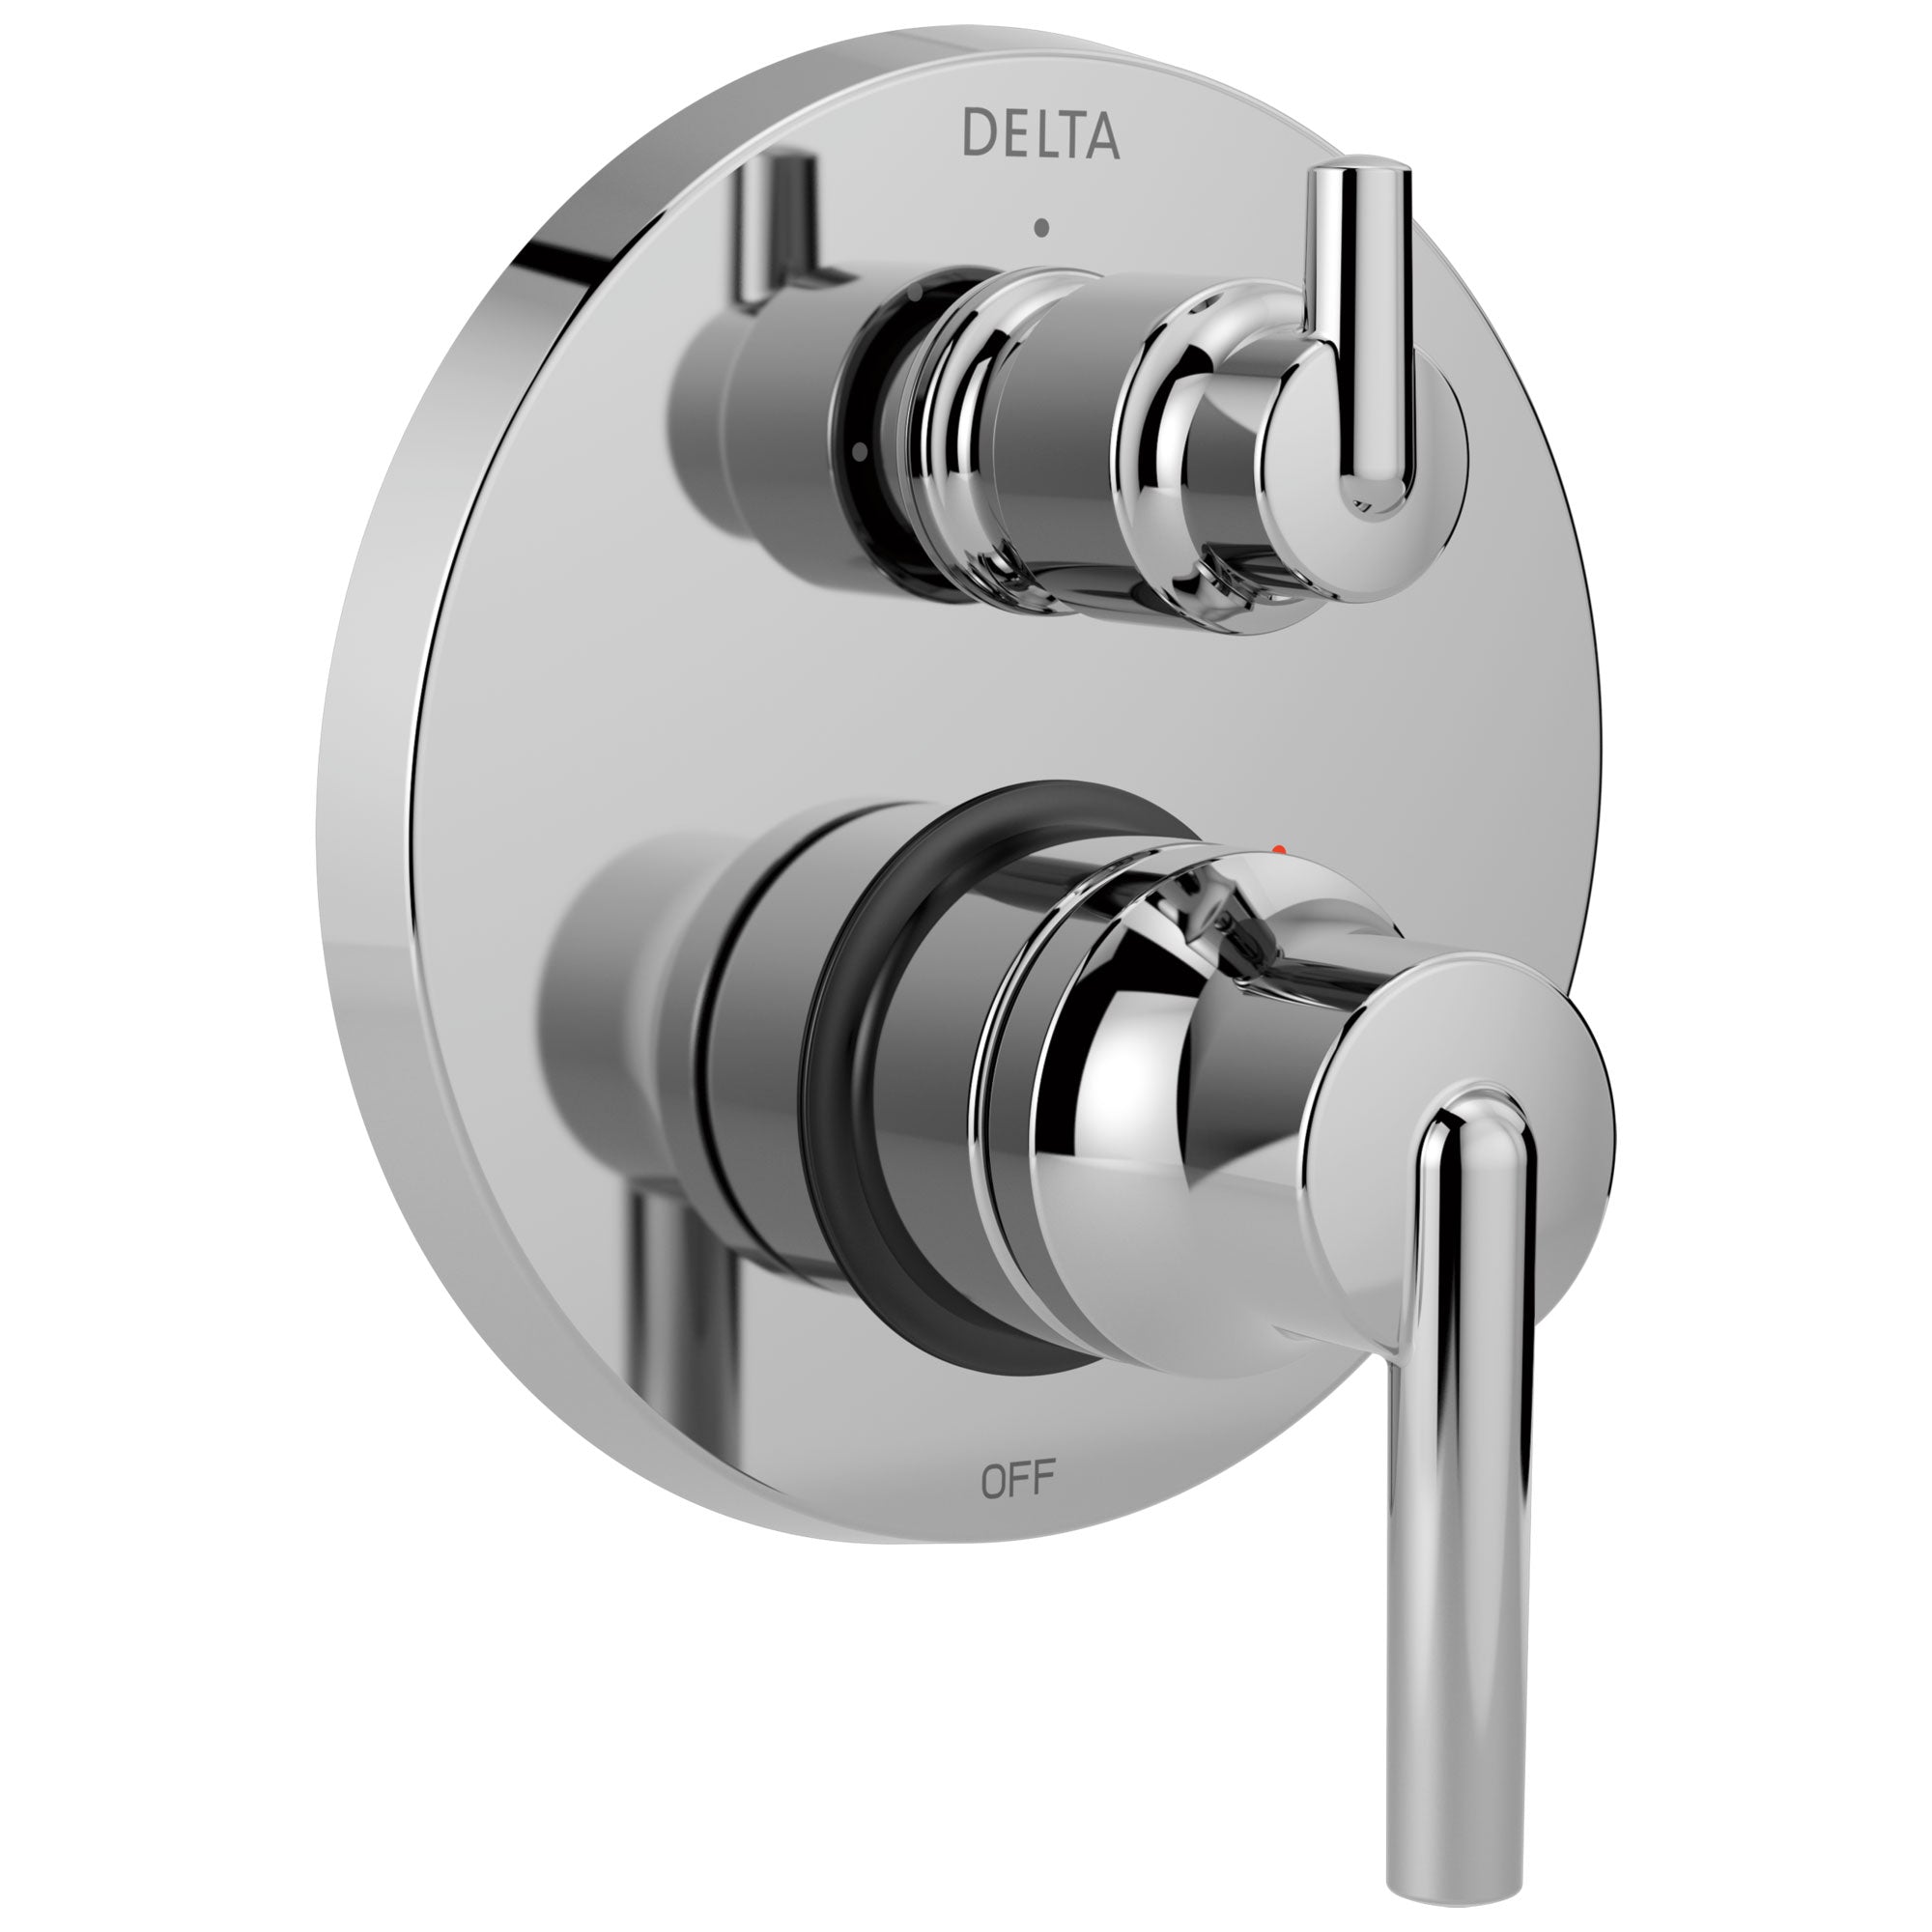 Delta Trinsic Collection Chrome Monitor 14 Shower Faucet Valve Trim Control Handle with 3-Setting Integrated Diverter (Requires Valve) DT24859